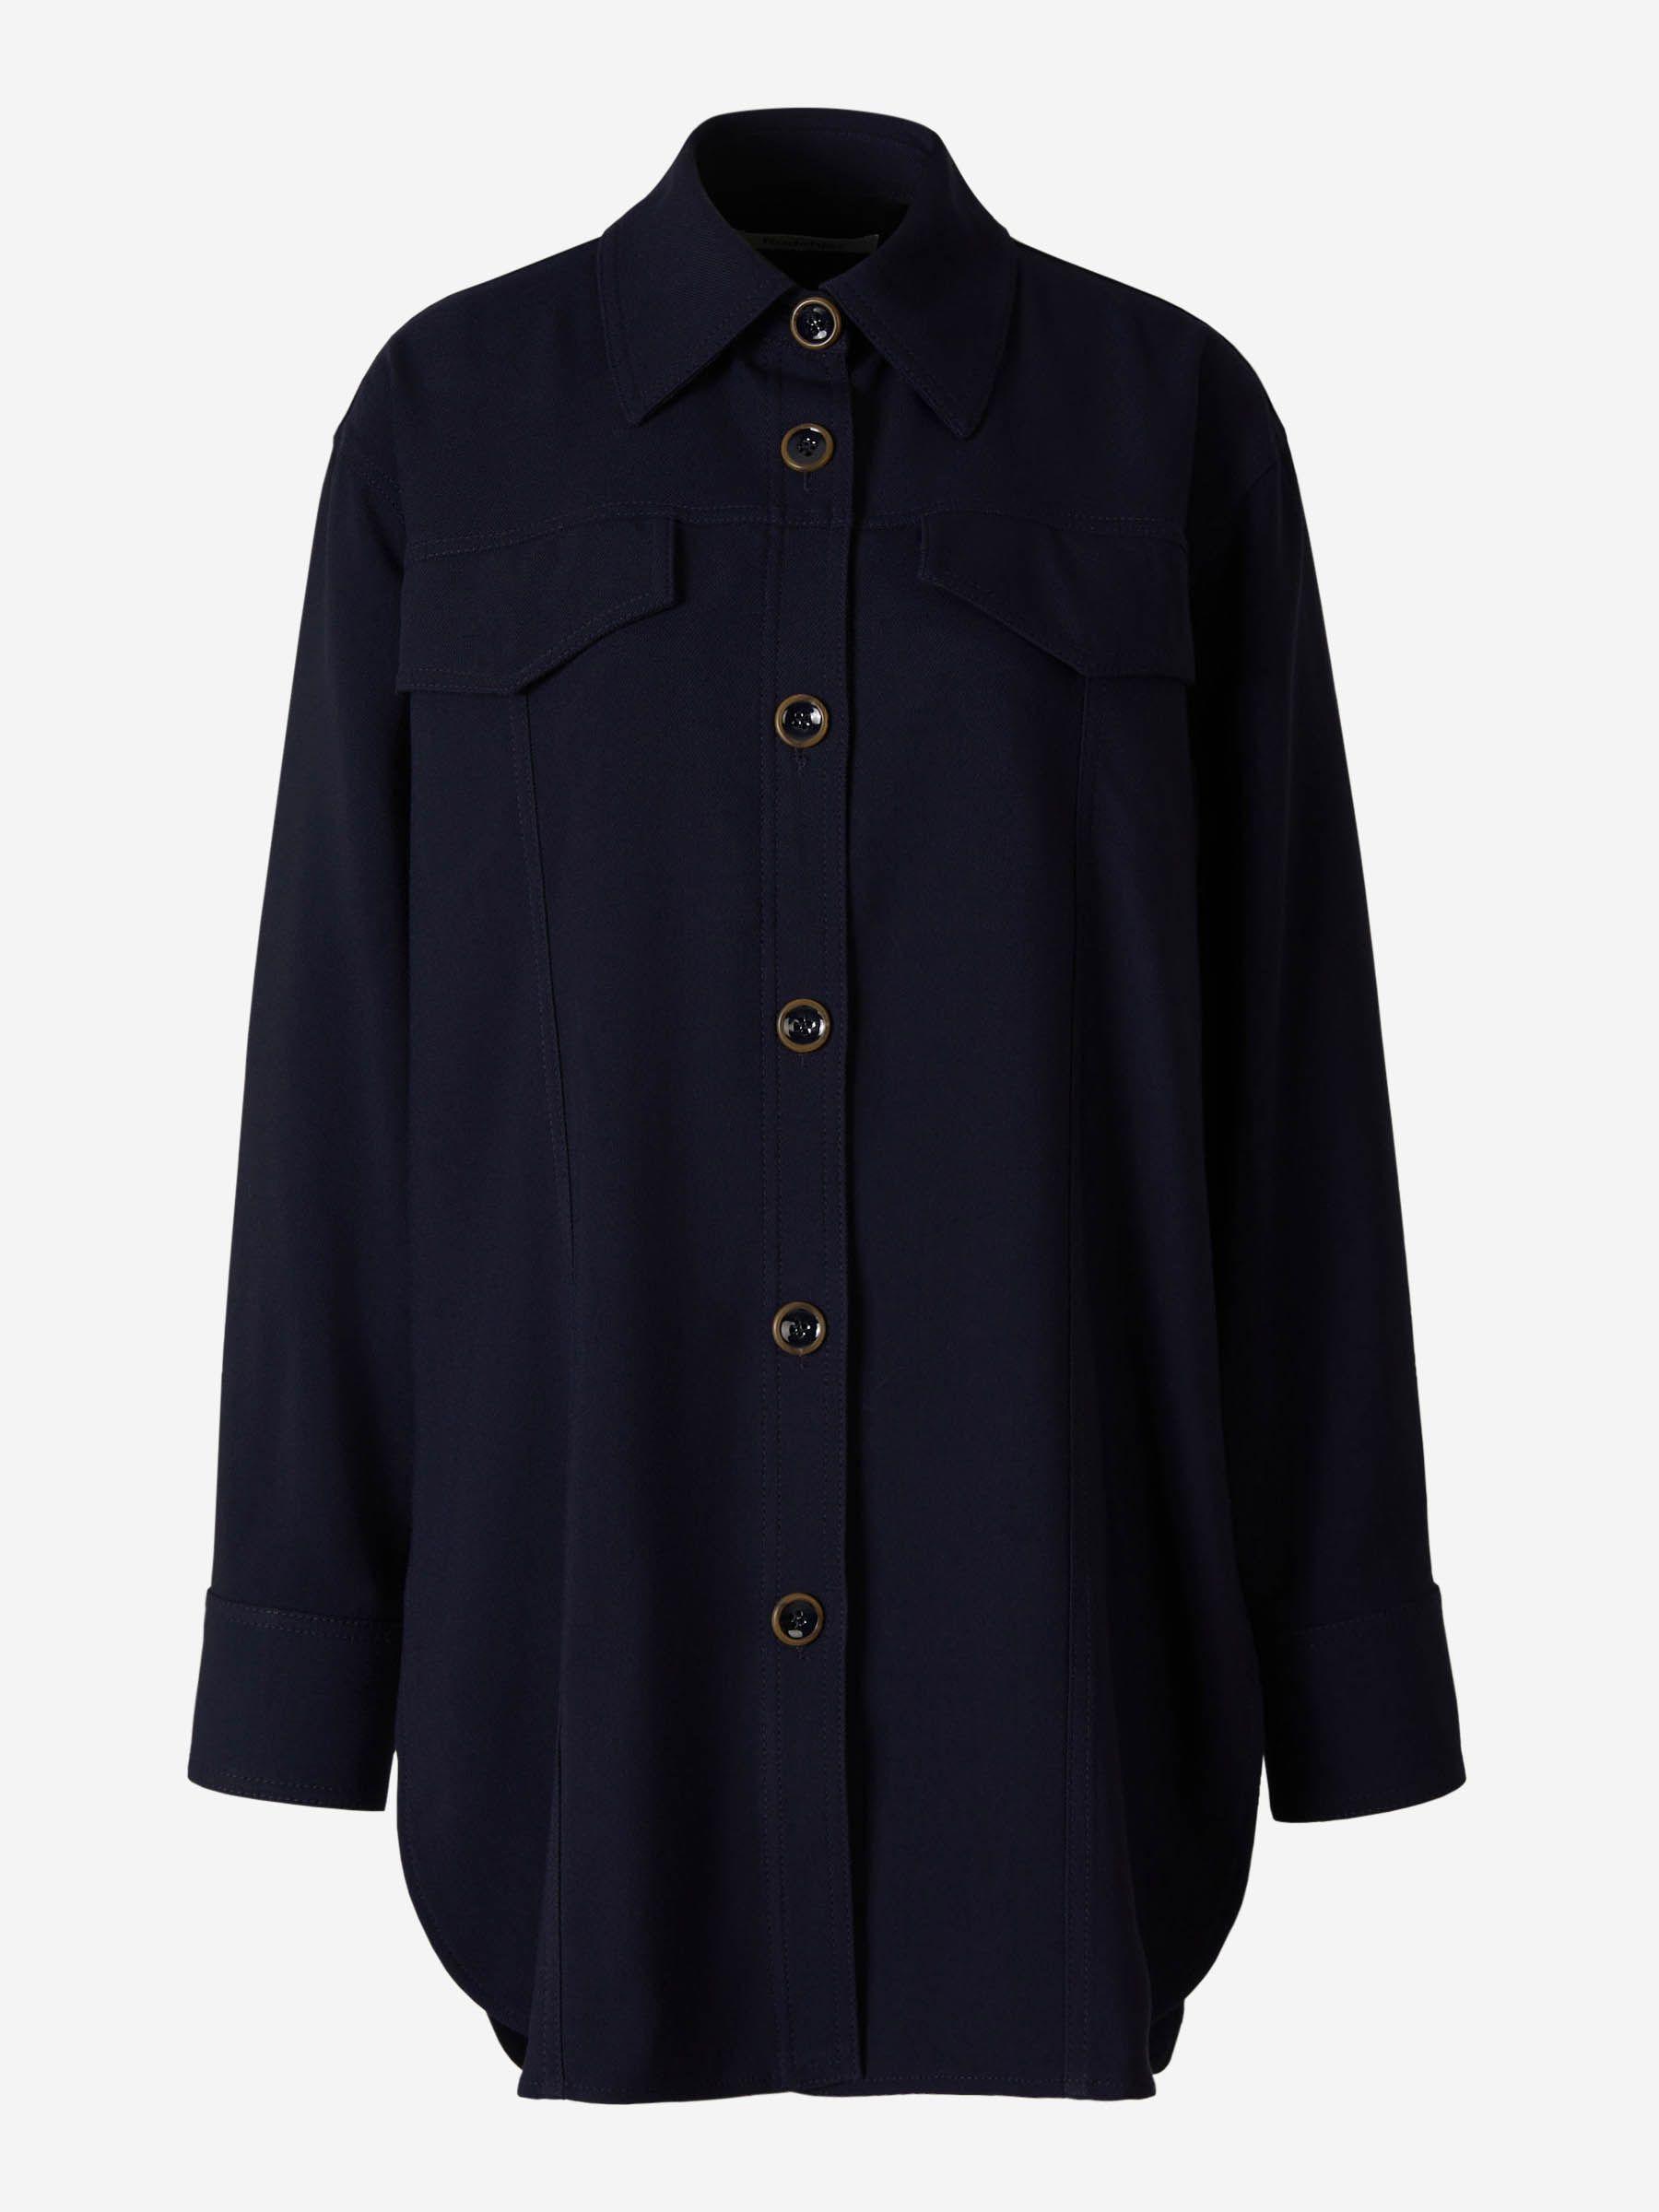 Rodebjer Seina Asymmetrical Jacket in Blue | Lyst